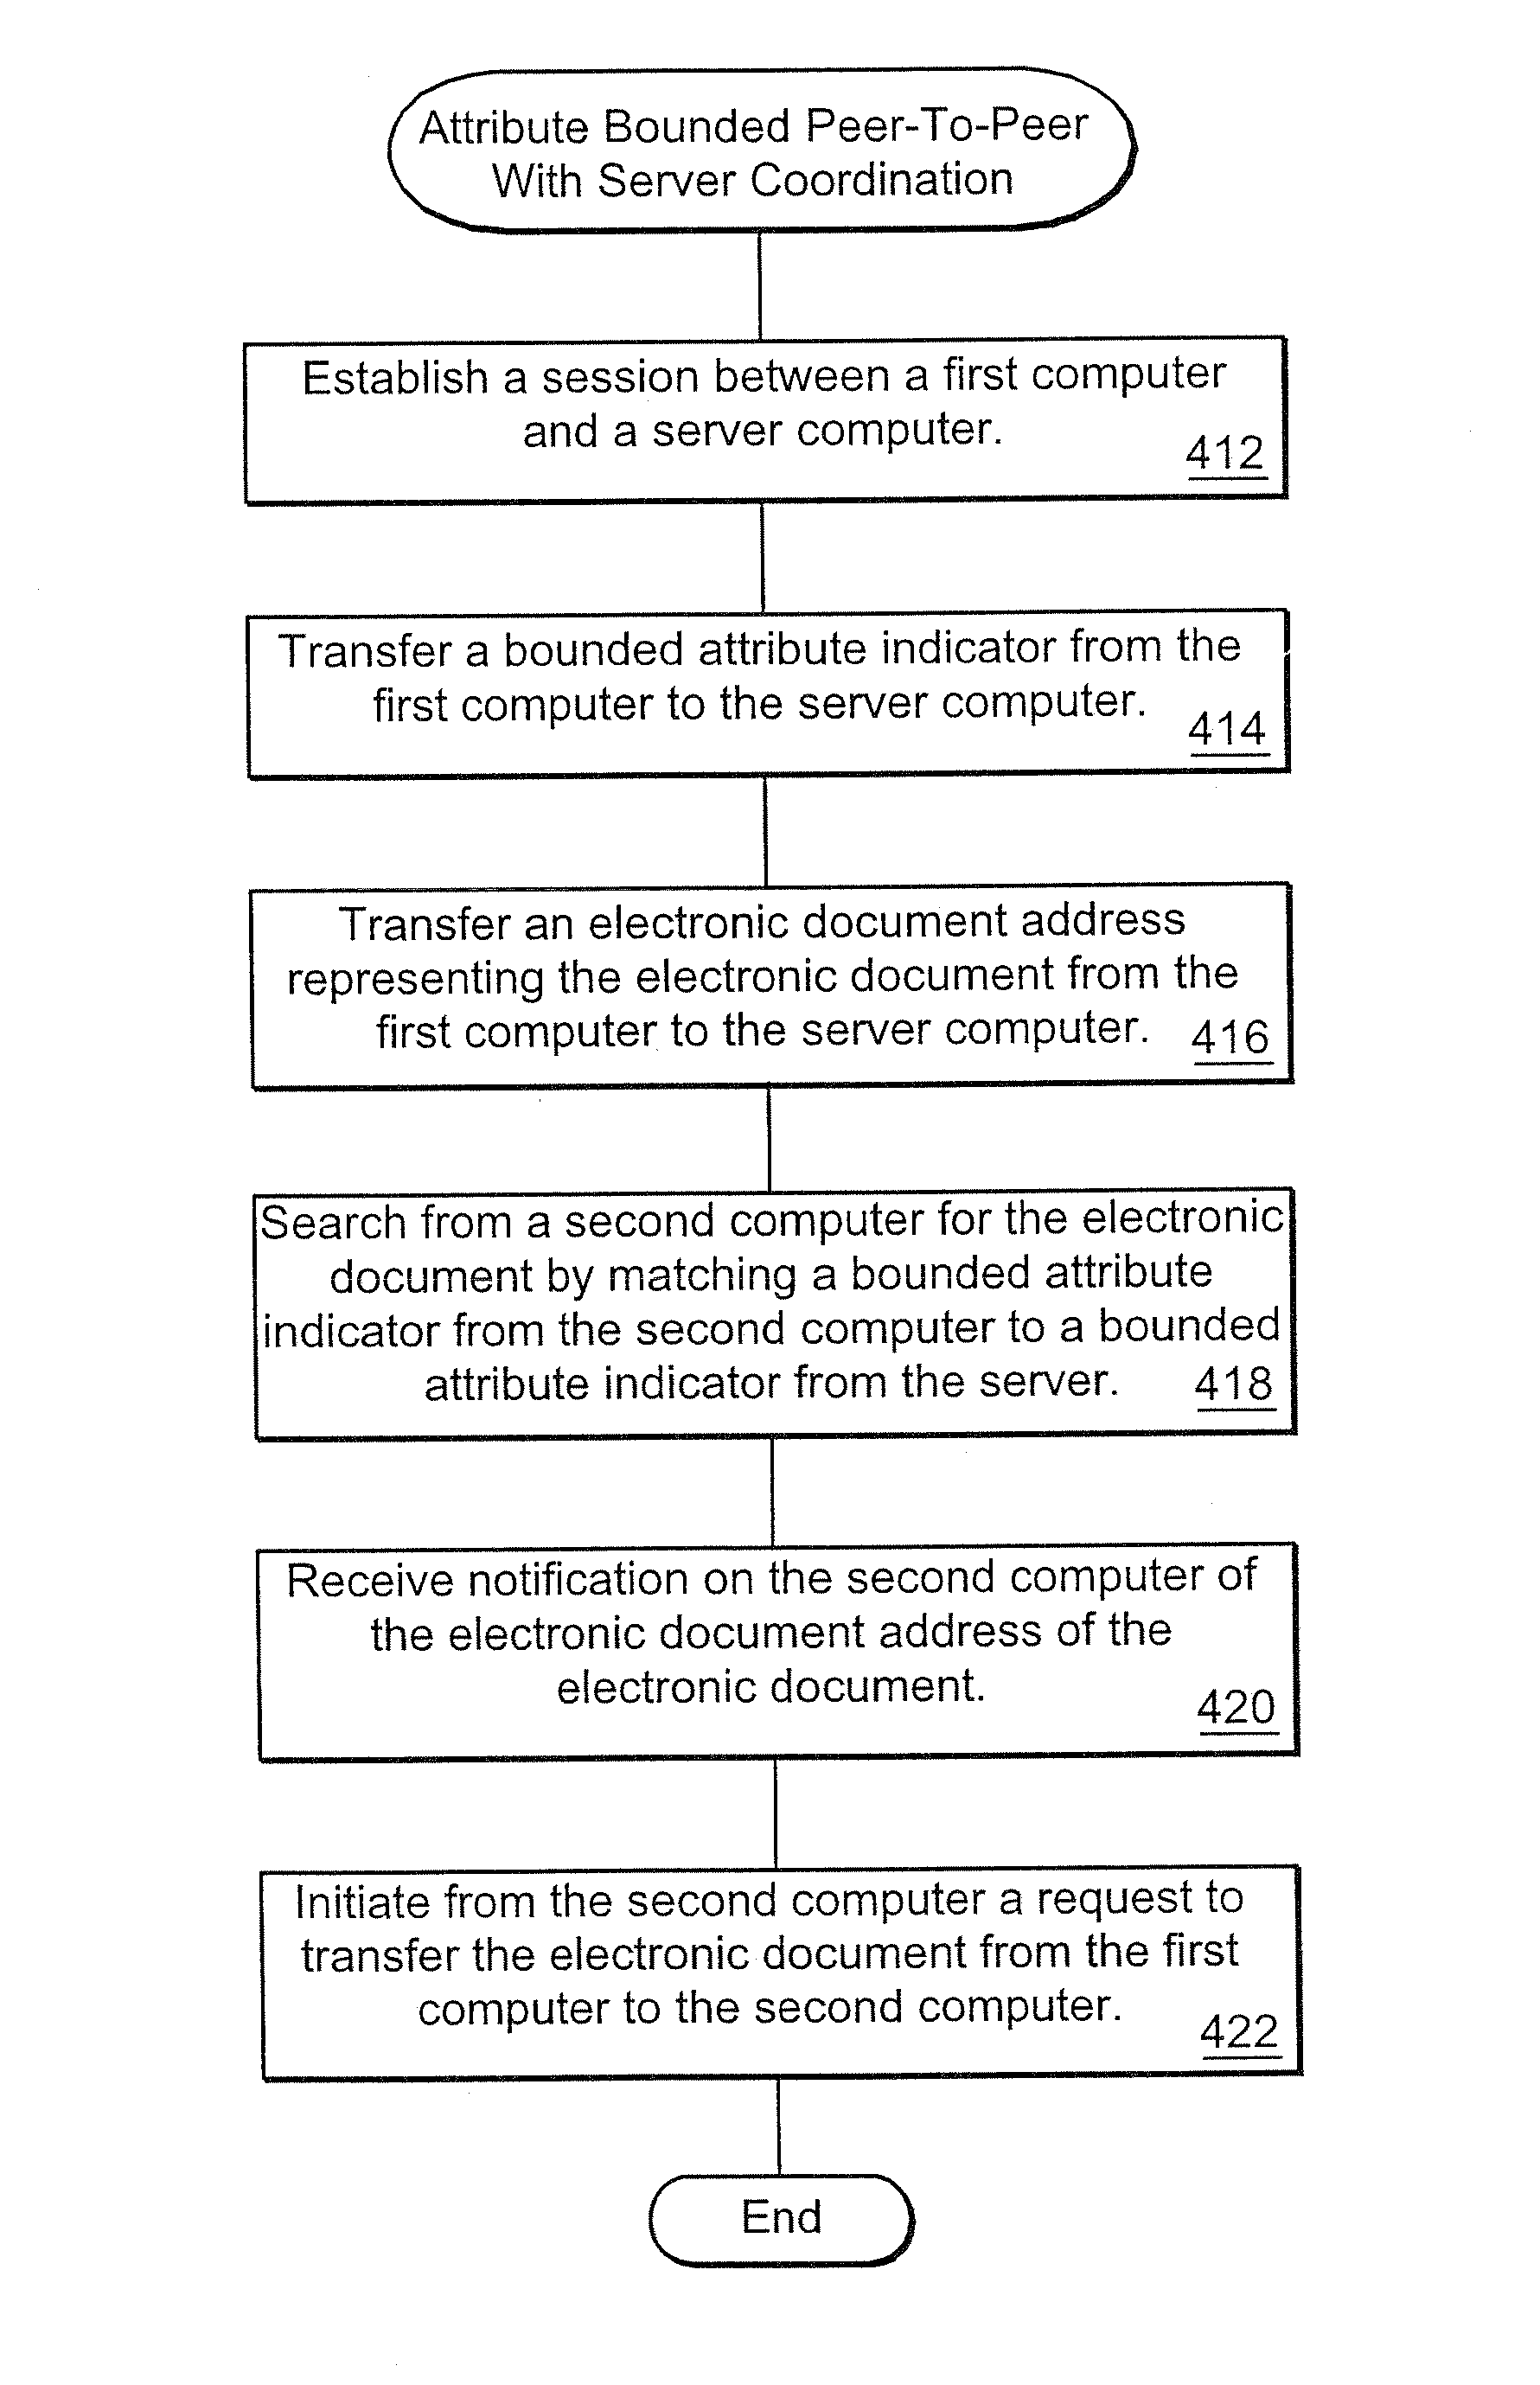 Method for Providing an Attribute Bounded Network of Computers